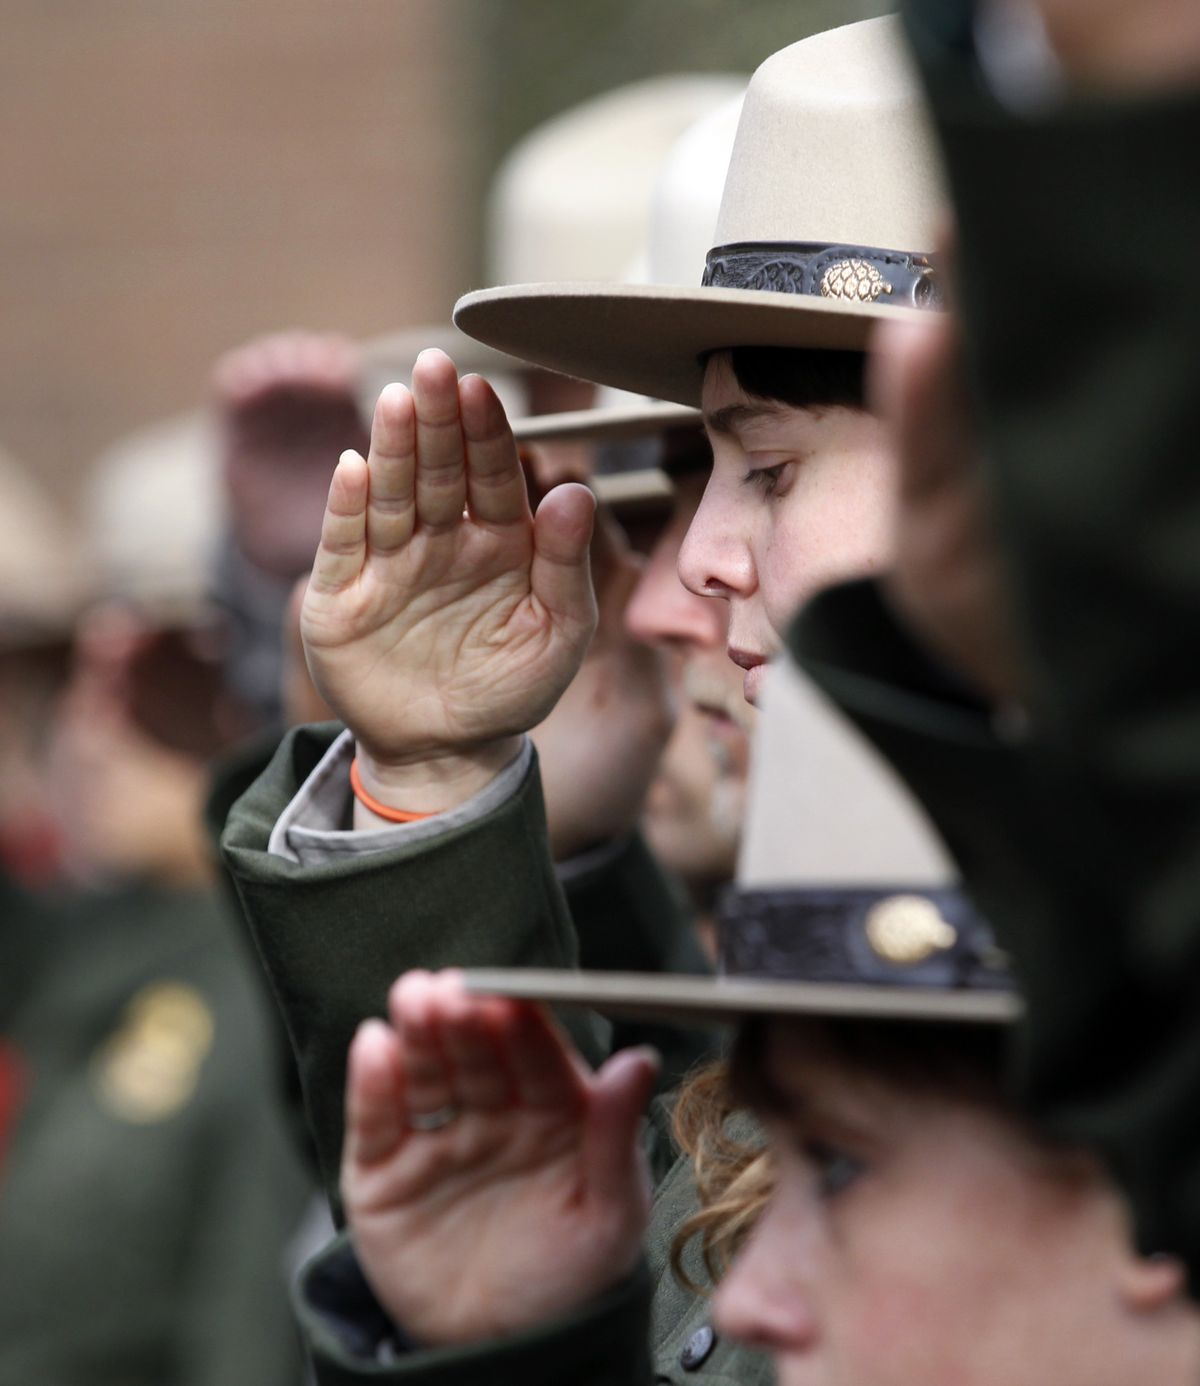 Park rangers and law enforcement personnel salute as the casket bearing the remains of Mount Rainier National Park Ranger Margaret Anderson is brought into a memorial service today in Tacoma. Anderson, a 34-year-old mother of two young girls, was shot and killed after setting up a roadblock to stop a vehicle that blew through a checkpoint on the road to the park